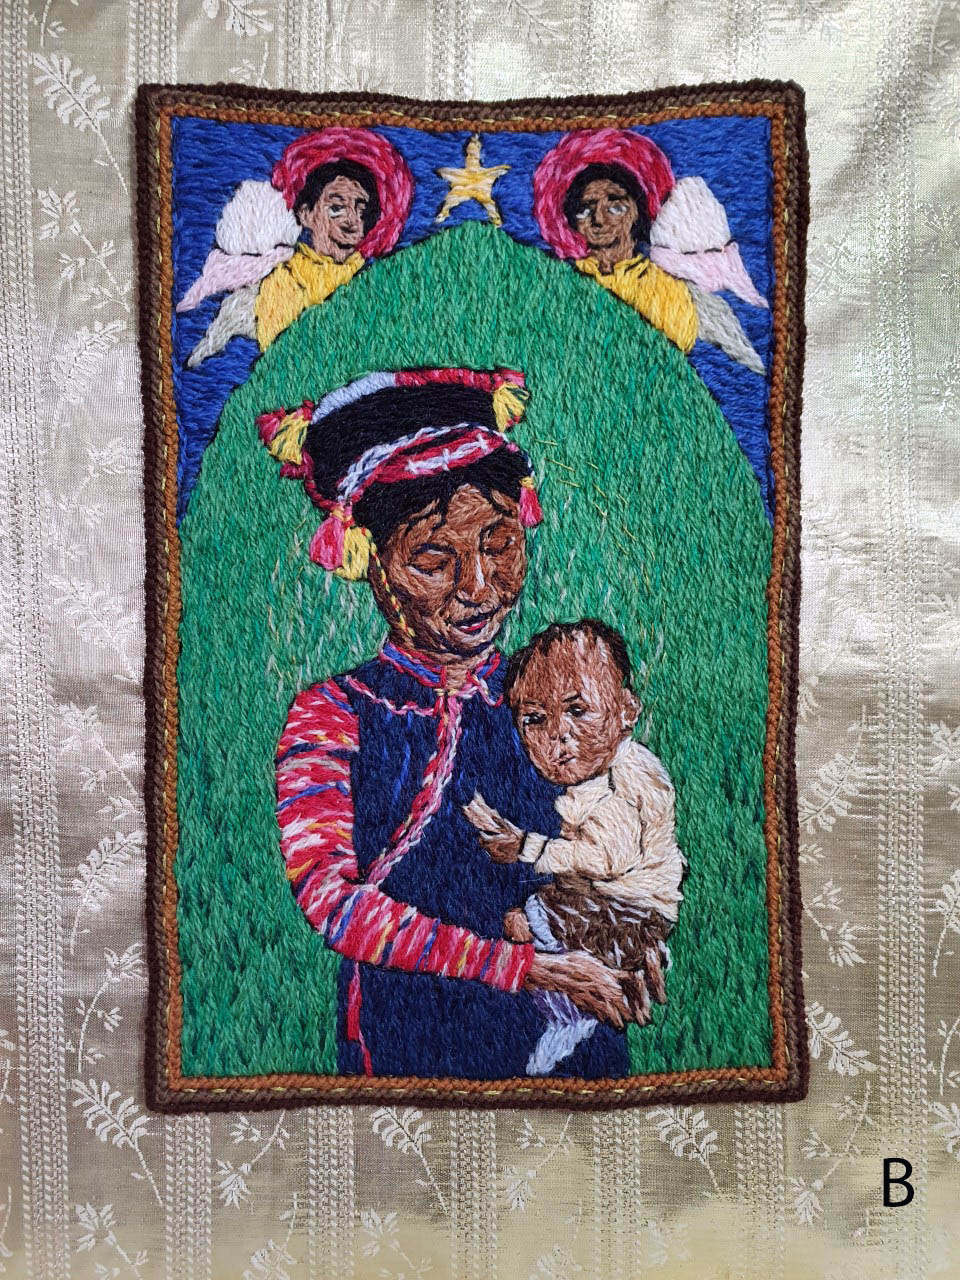 MADONNA AND CHILD, freestyle crewel embroidery, hand stitch on tapestry canvas, Rose Bowl competition 2021